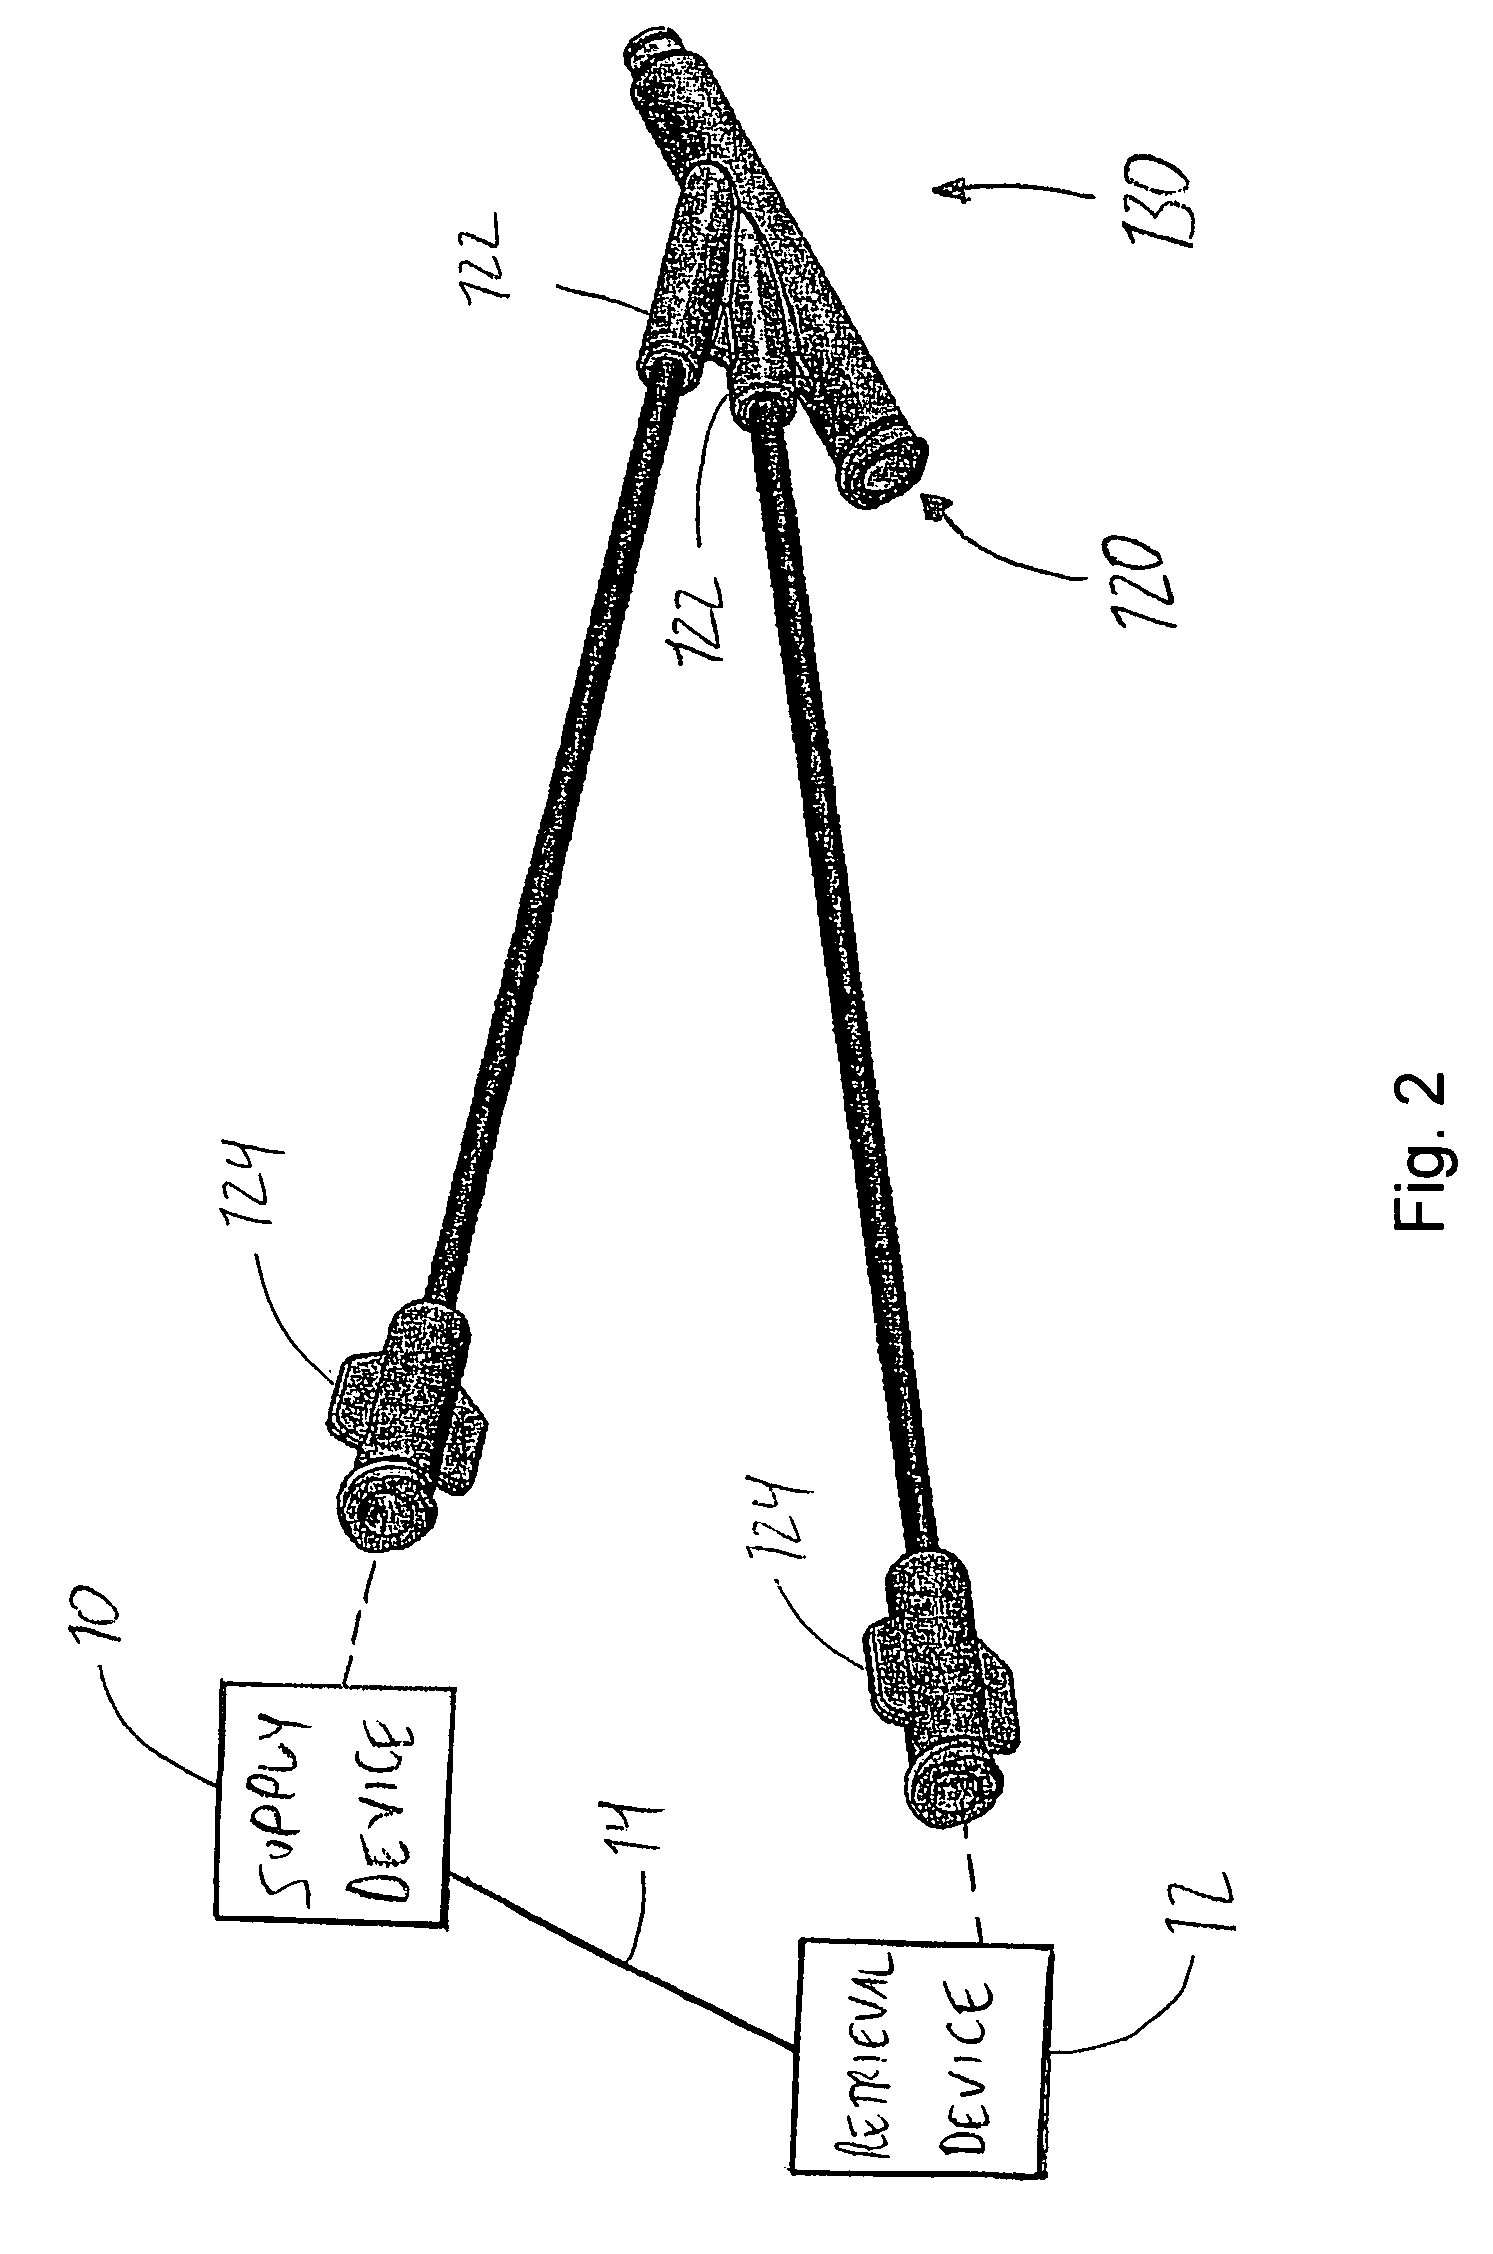 Catheter for treatment of total occlusions and methods for manufacture and use of the catheter